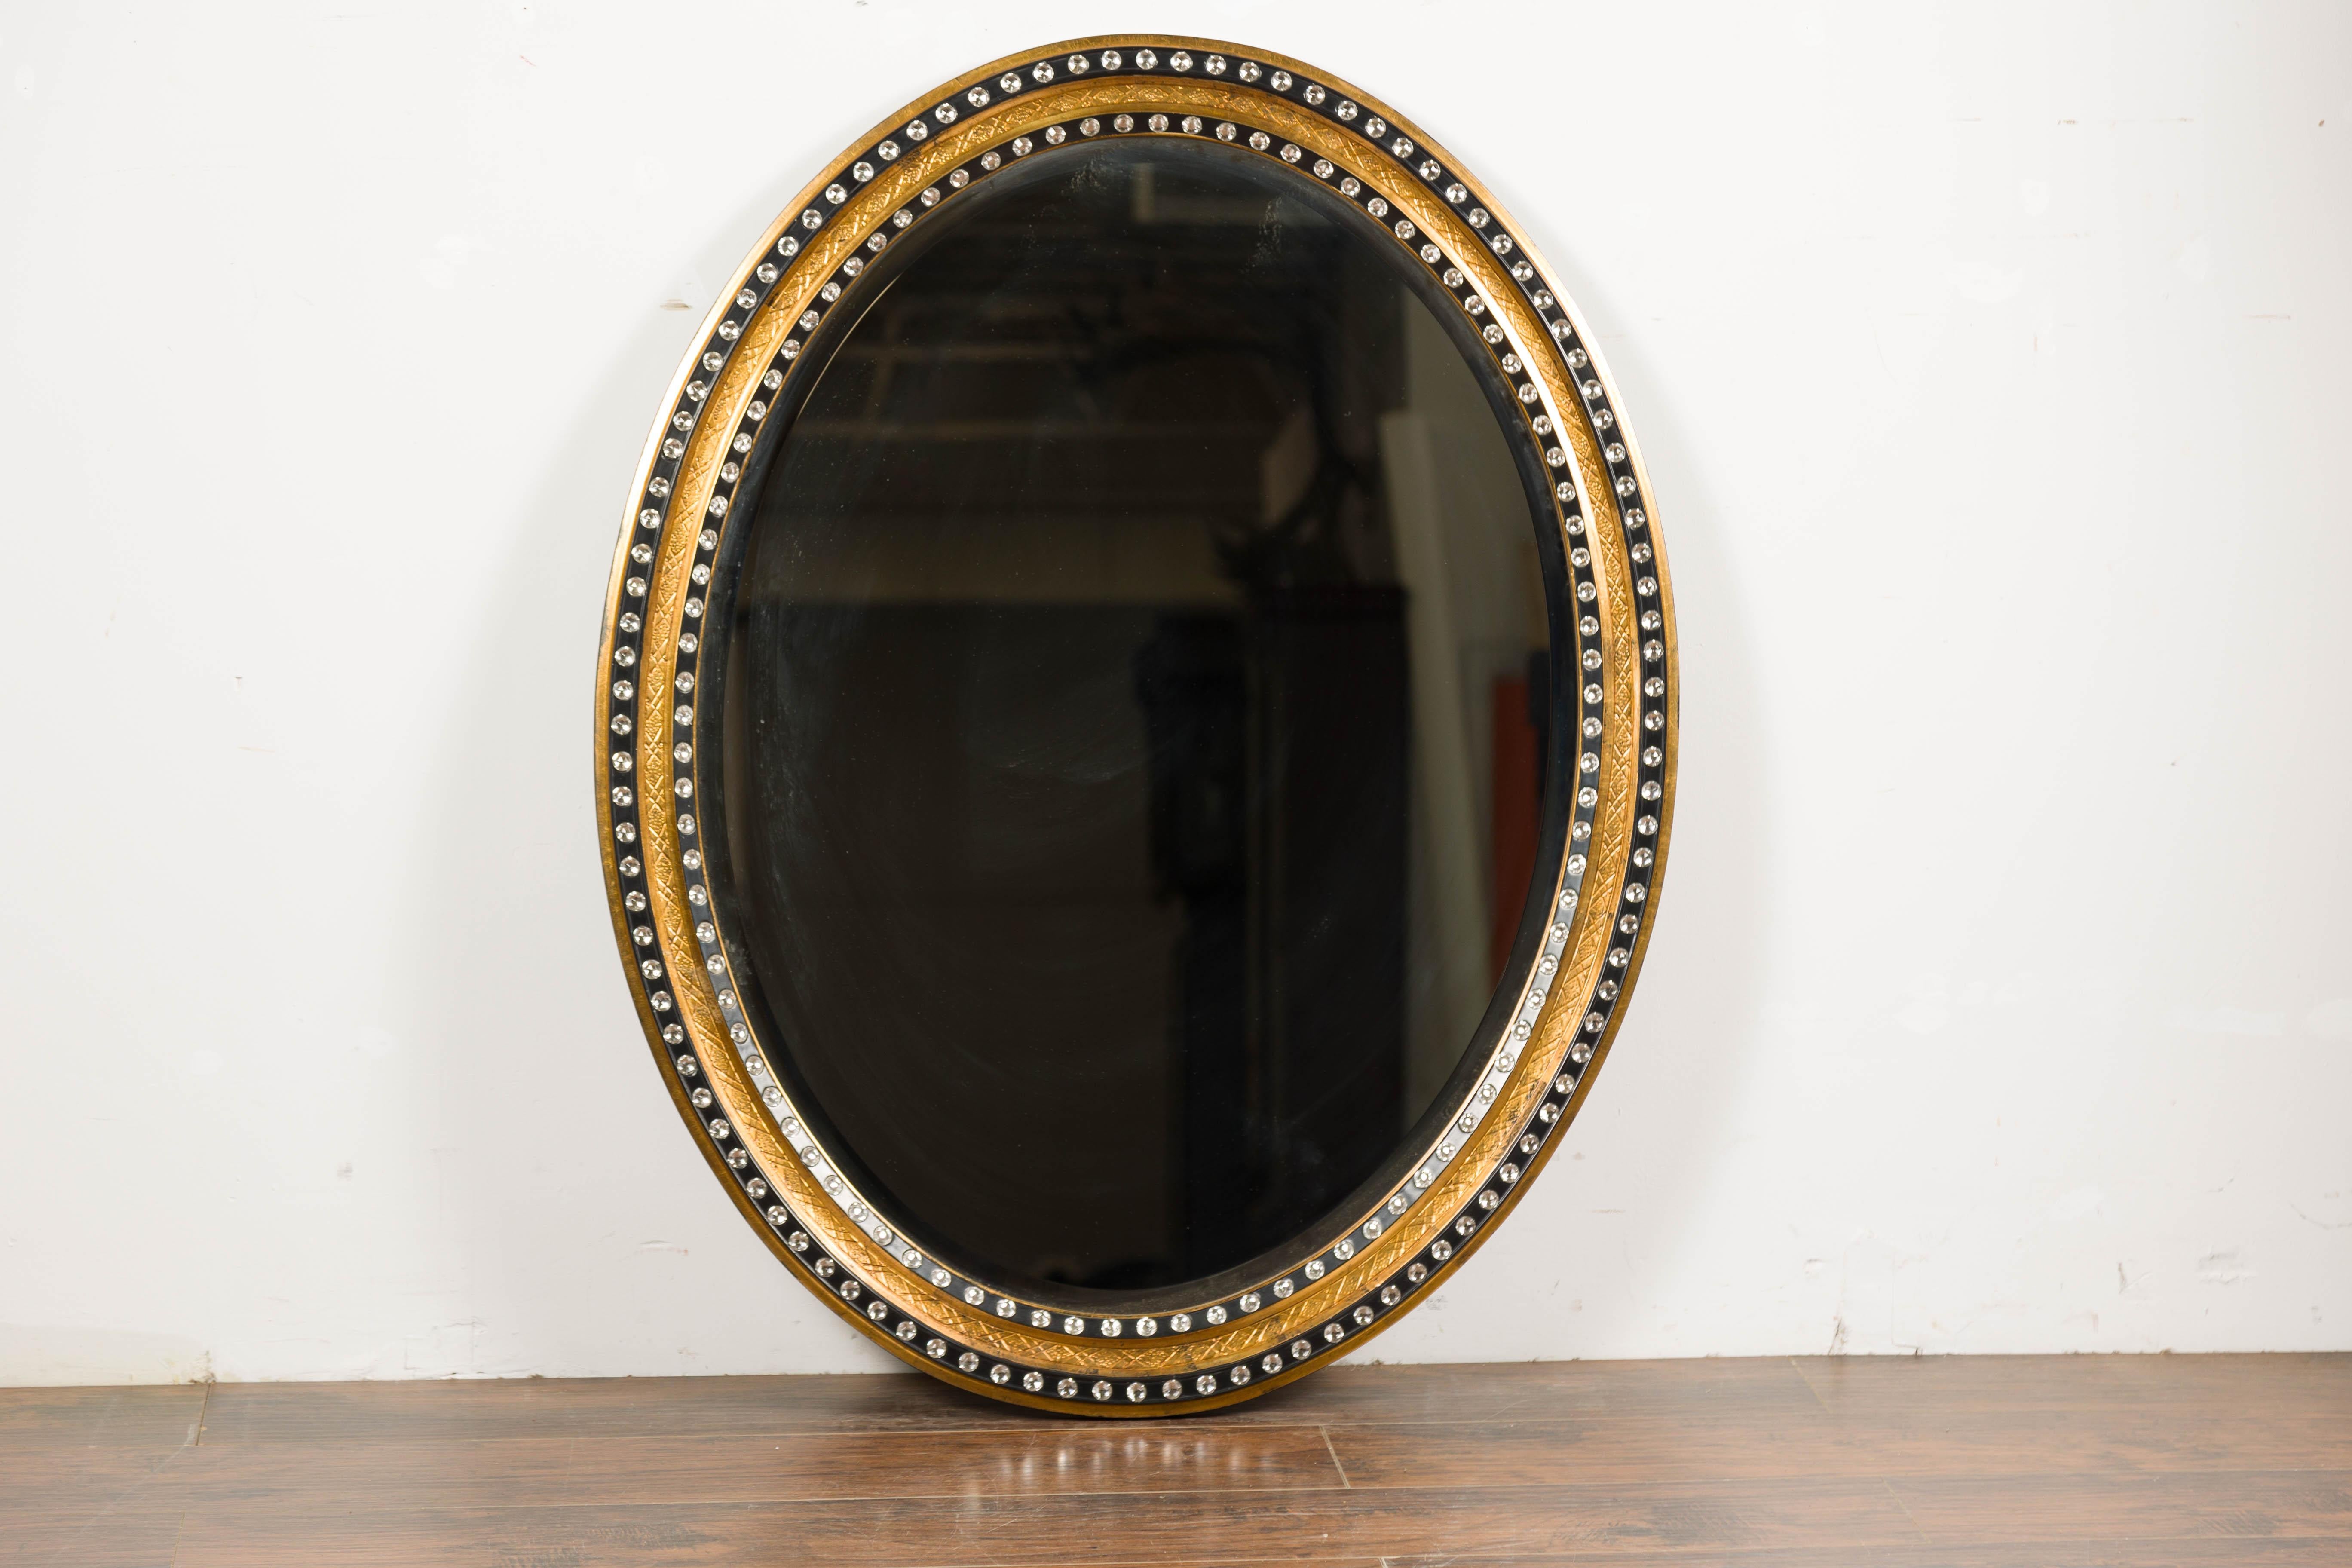 Midcentury Irish Oval Gold and Black Mirror with Diamanté Décor For Sale 6